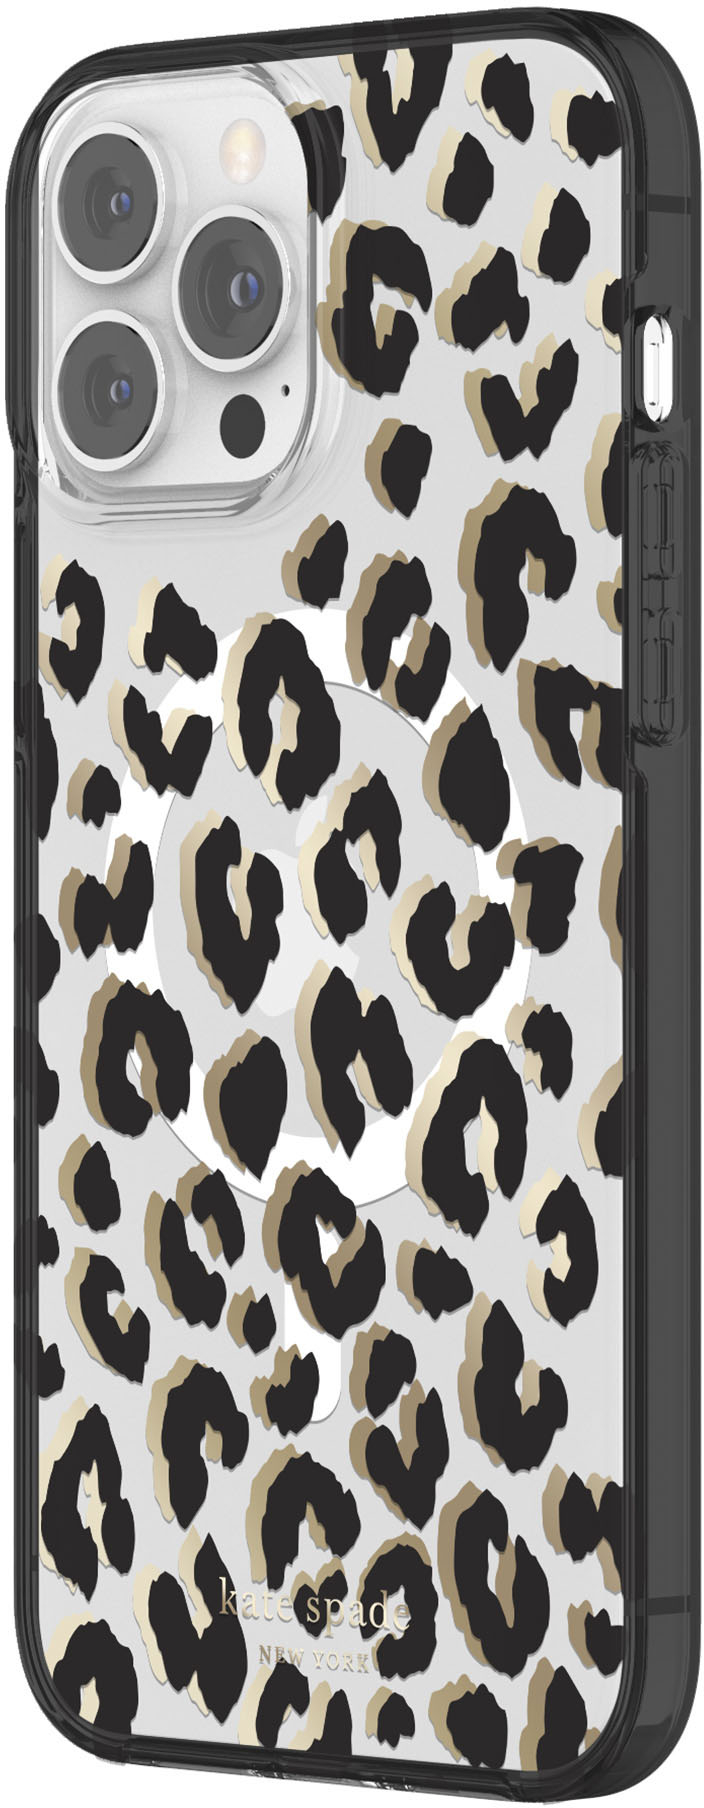 Angle View: kate spade new york - Protective Hardshell Case for Apple iPhone 12 Pro Max - Clover Hearts Knockout